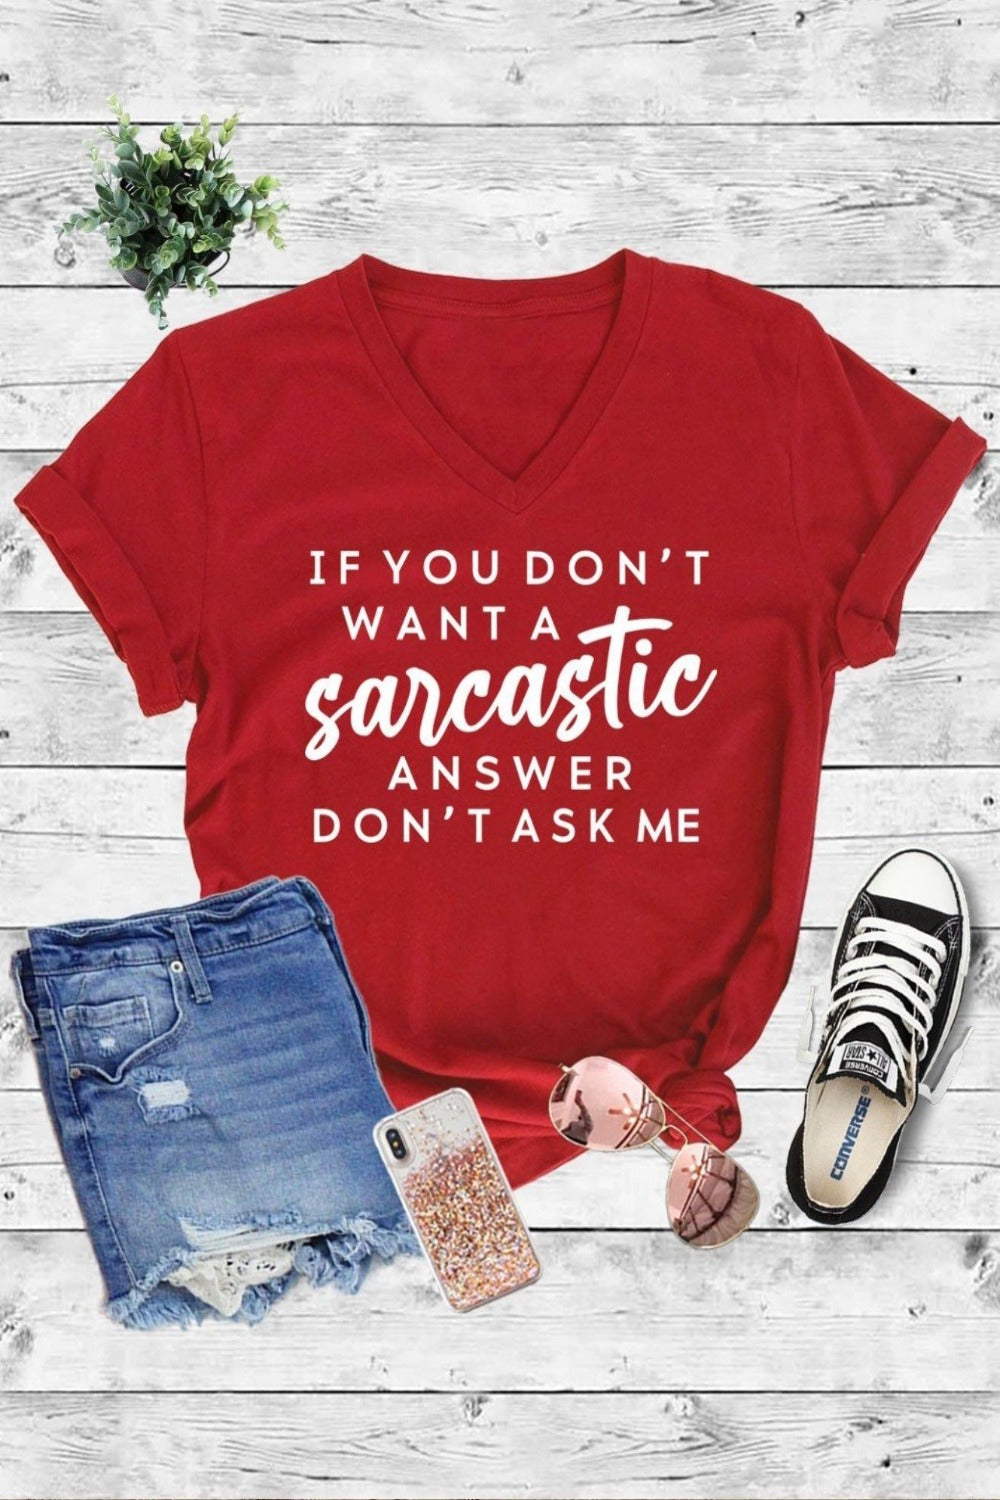 If You Don't Want A Sarcastic Answer Don't Ask Me Funny Graphic T-Shirt